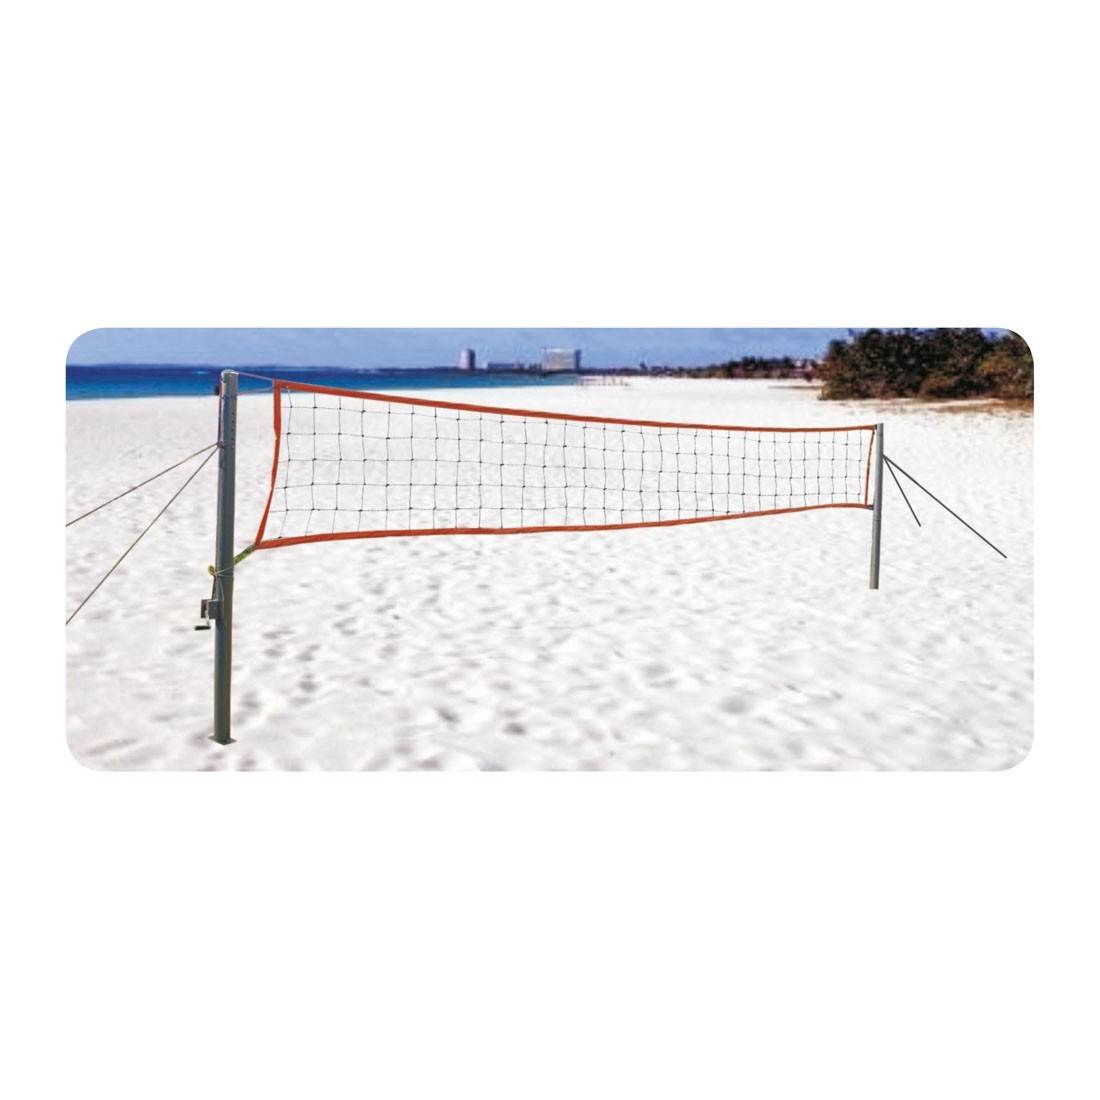 BEACH VOLLEYBALL POLE STAG - INCLUDES NET